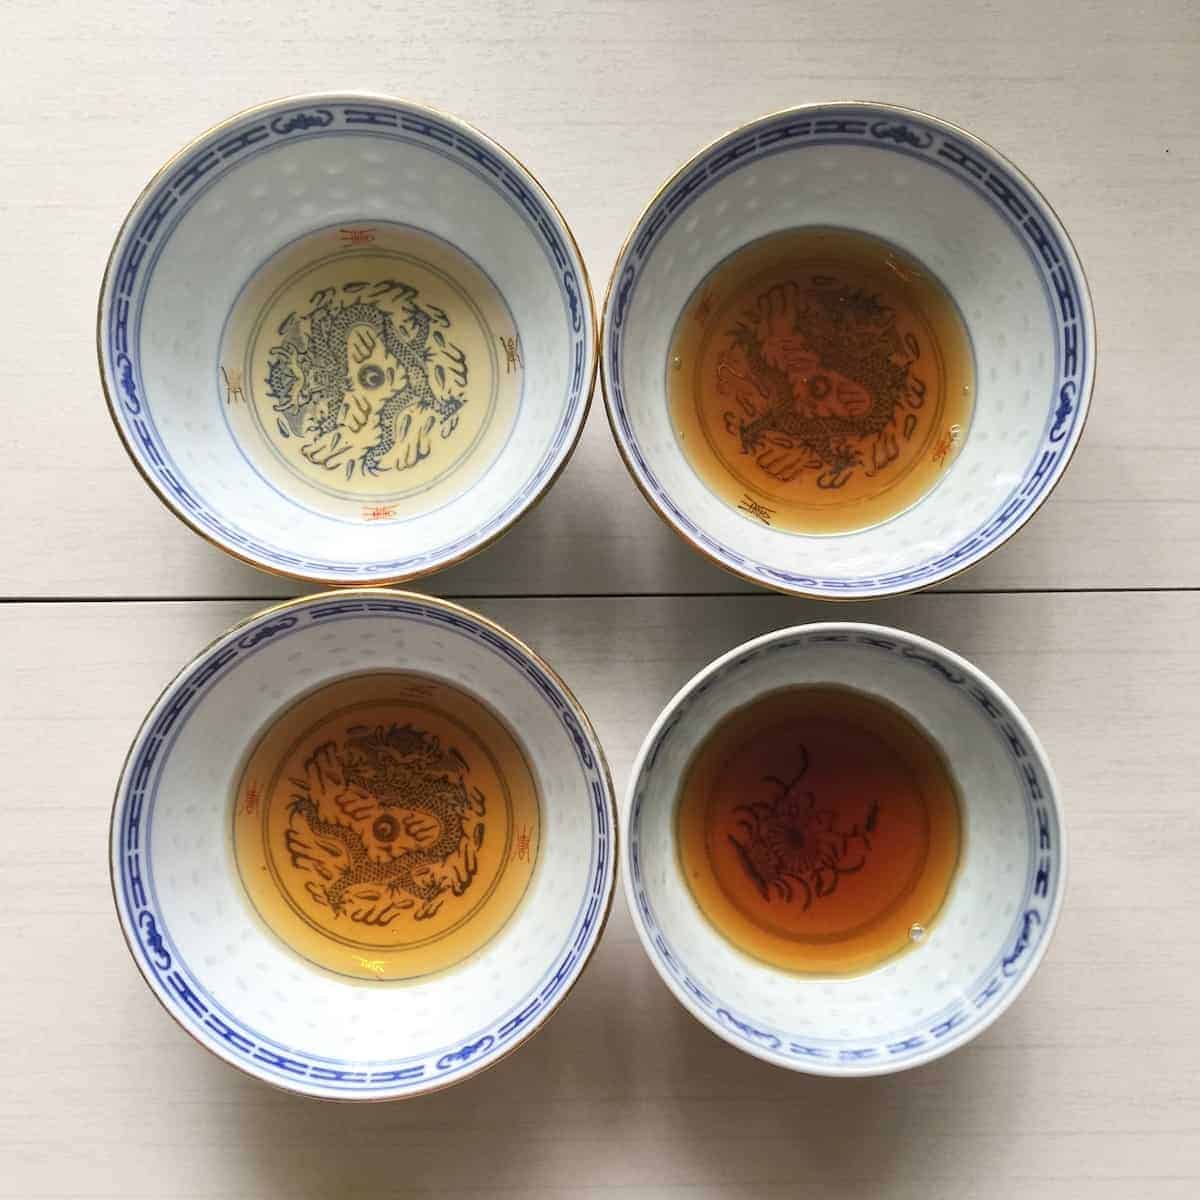 4 Cups of red dates, ginger, wolfberries and dried longan tea, brewed for different periods of time